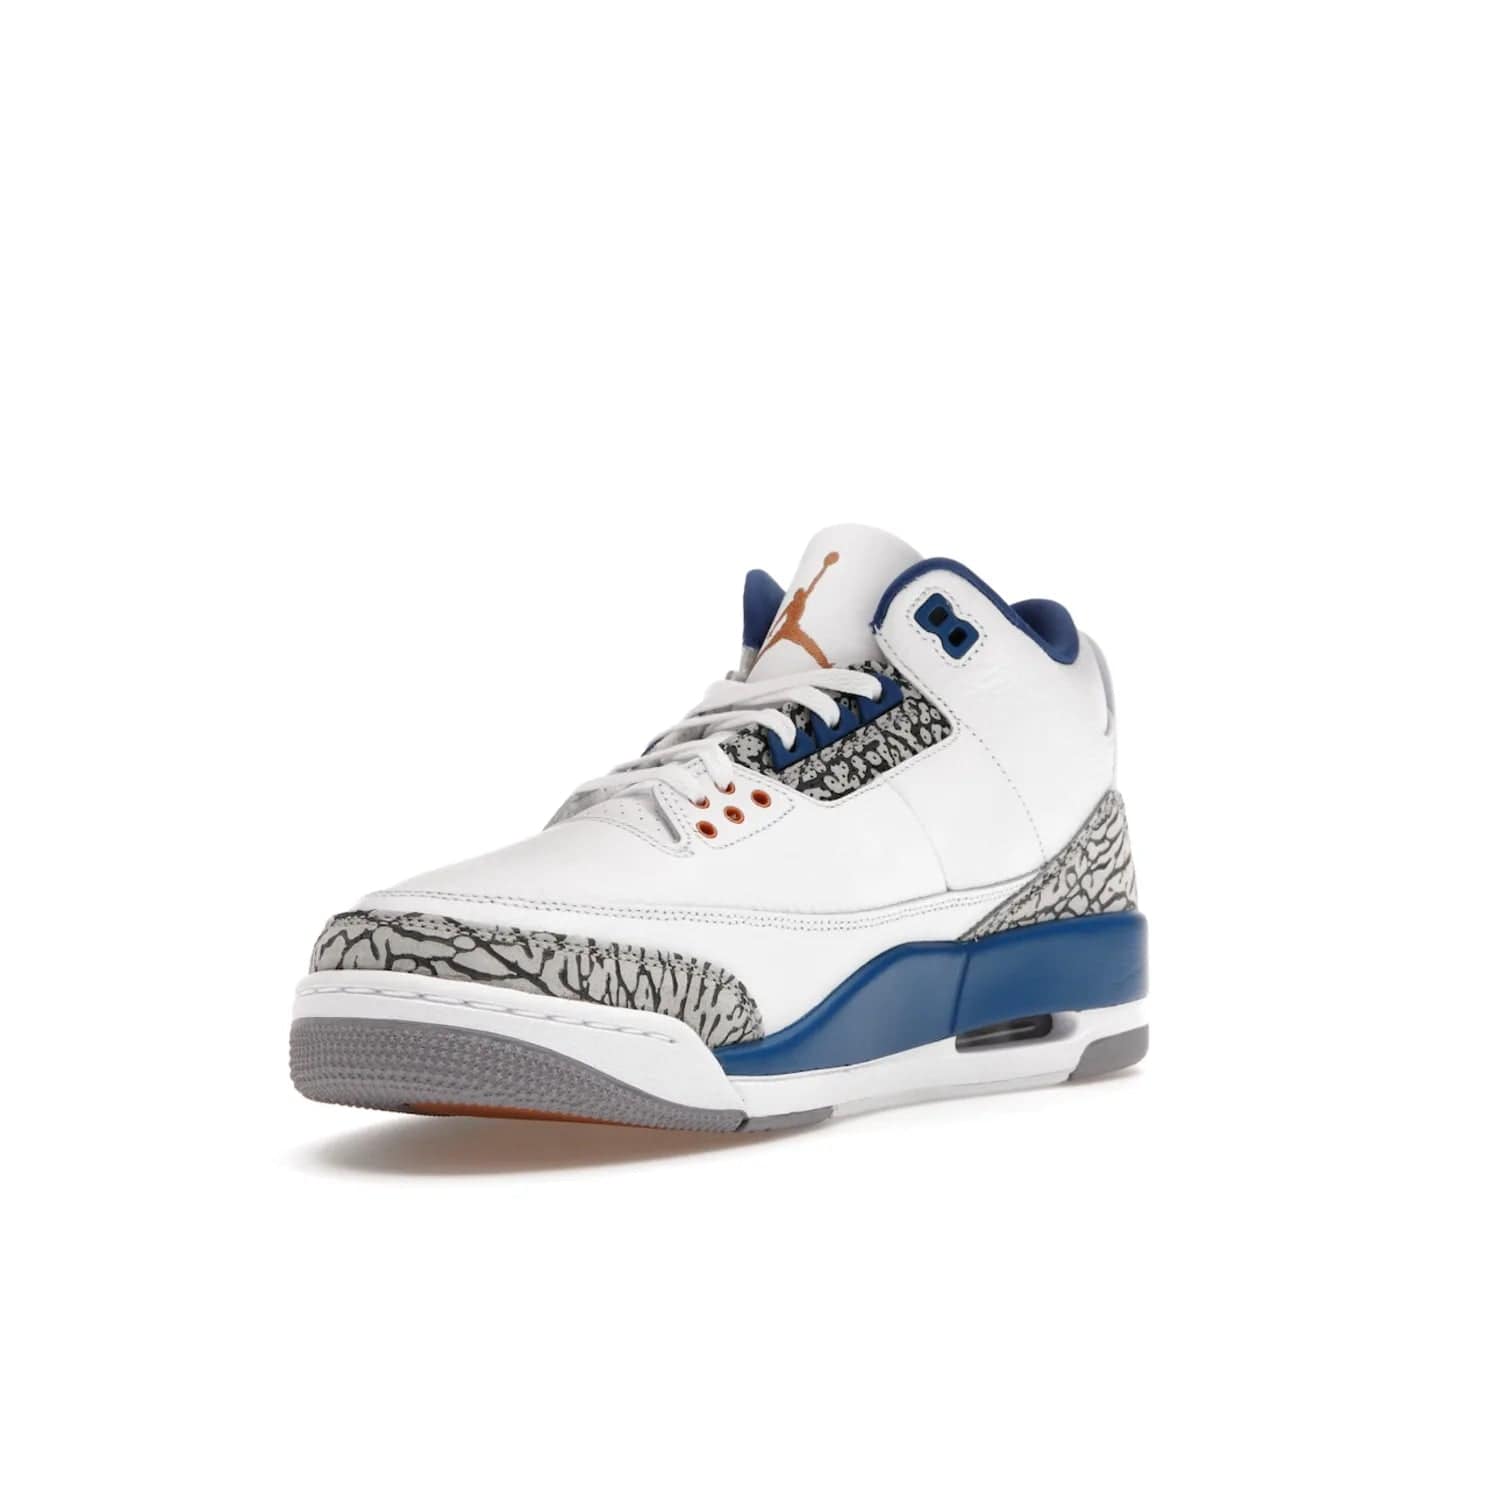 Jordan 3 Retro Wizards - Image 14 - Only at www.BallersClubKickz.com - ##
Special tribute sneaker from Jordan Brand to Michael Jordan's time with the Washington Wizards. Iconic white upper, orange Jumpman logo, blue accents, metallic copper details, and cement grey outsole. Buy the Air Jordan 3 Retro Wizards April 29, 2023.